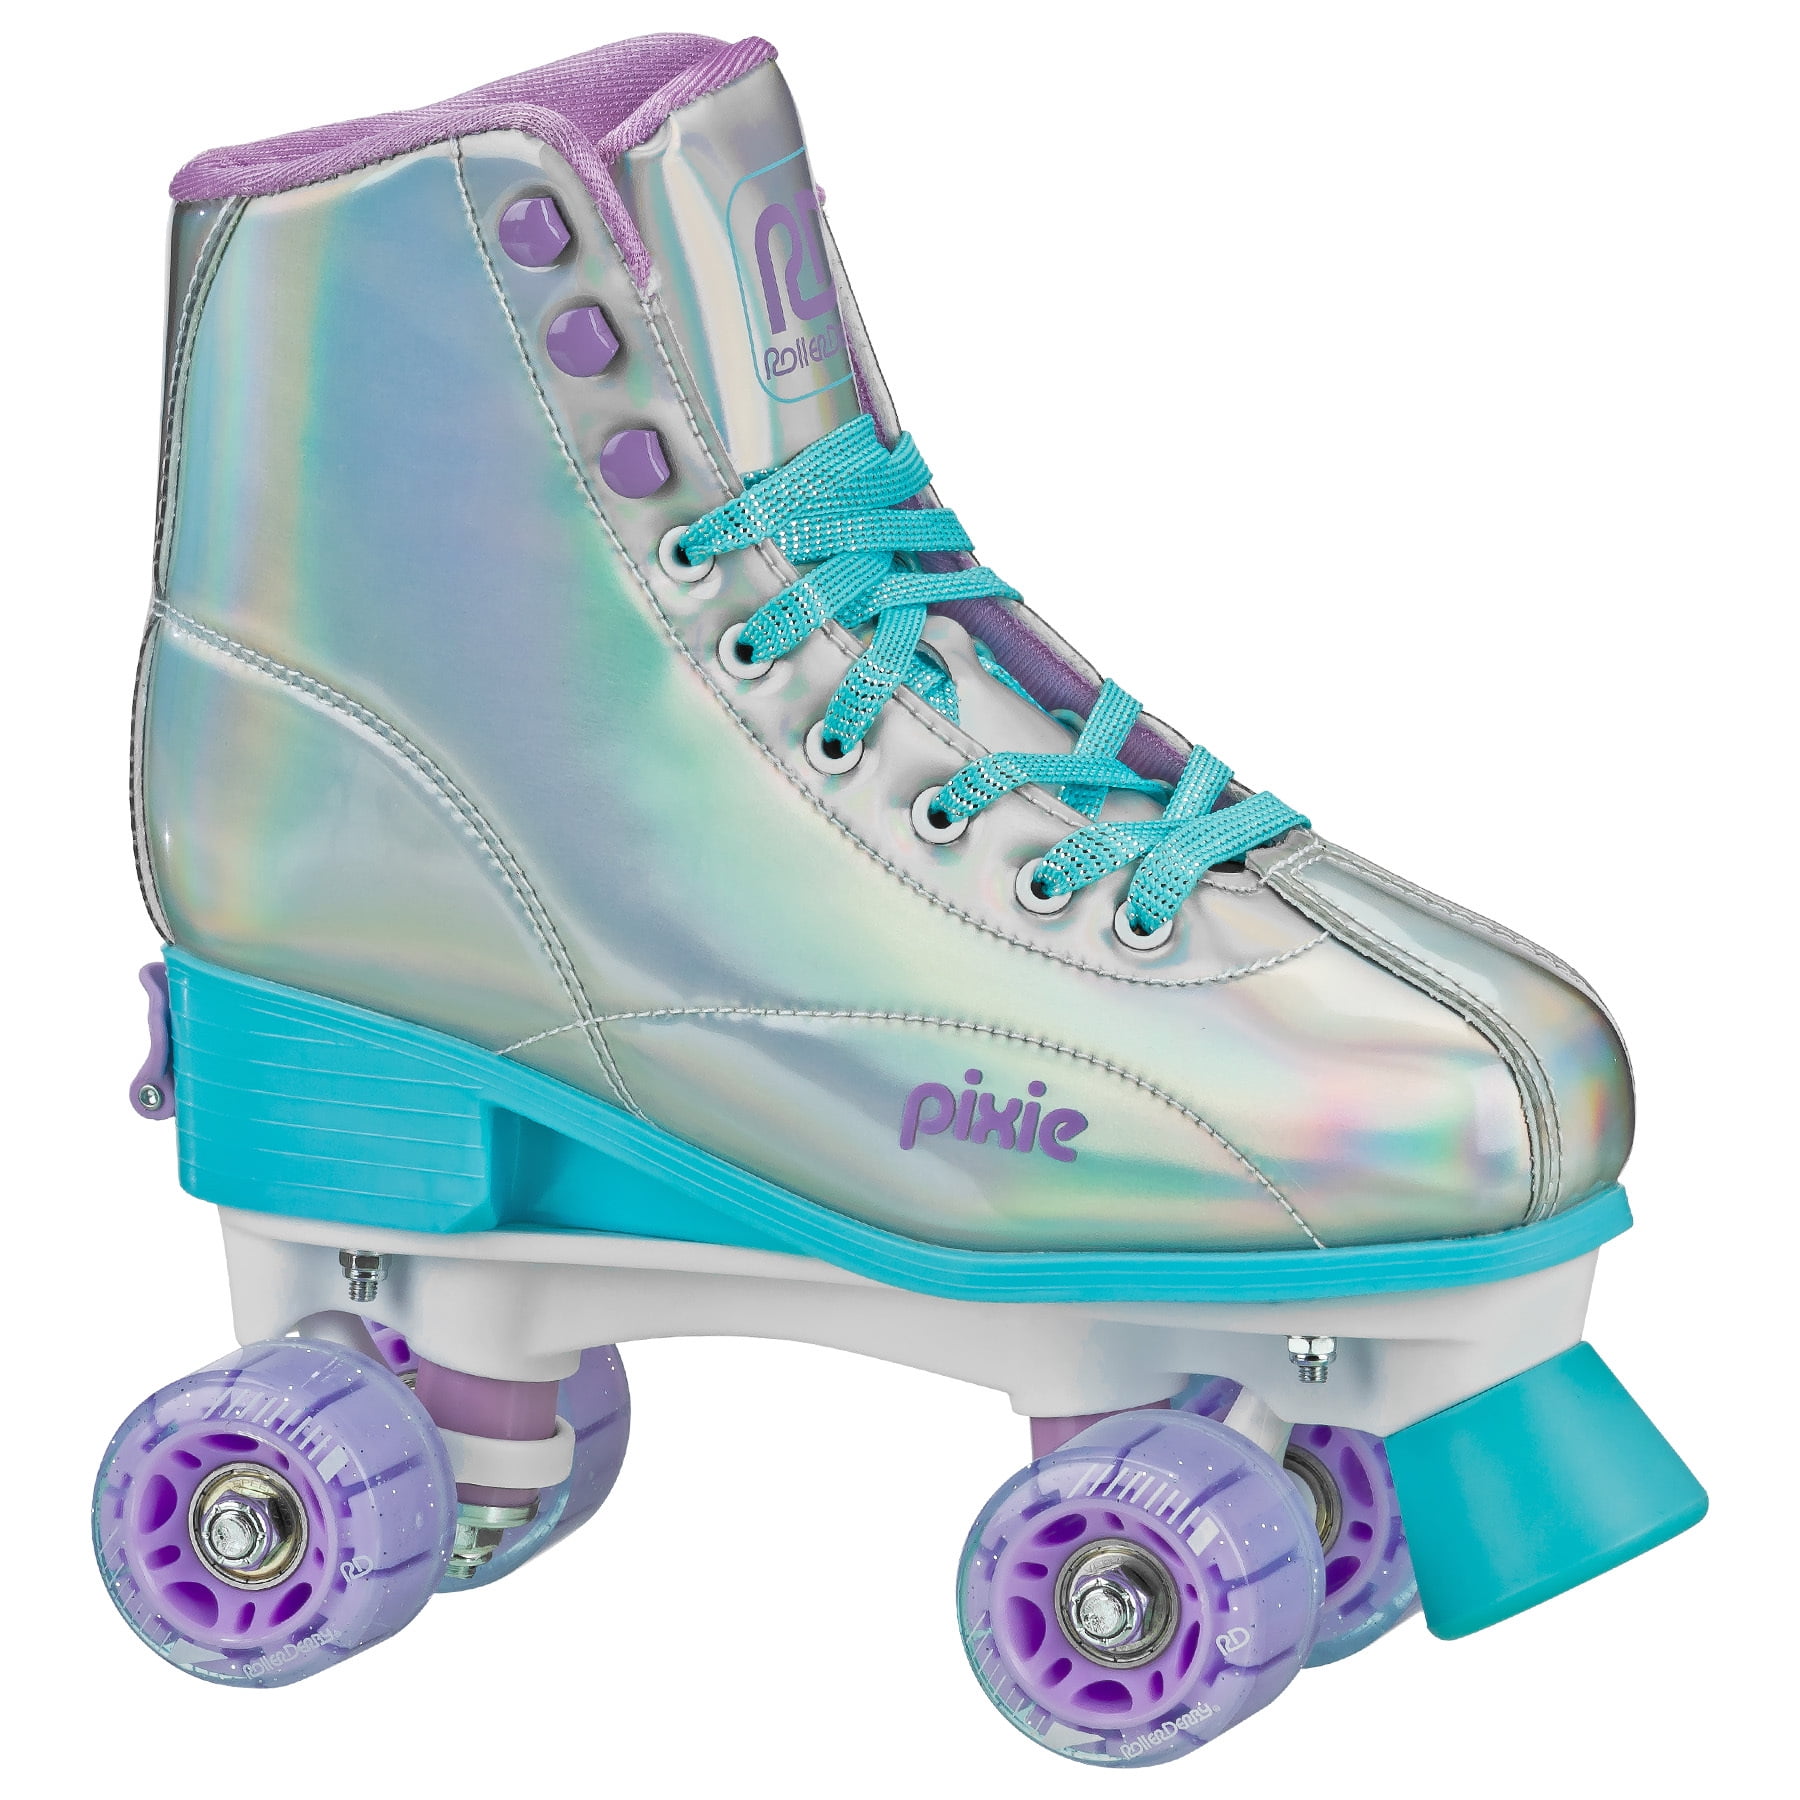 Roller Derby Girls Pixie Holographic Roller Skates with Adjustable sizing (3-6)